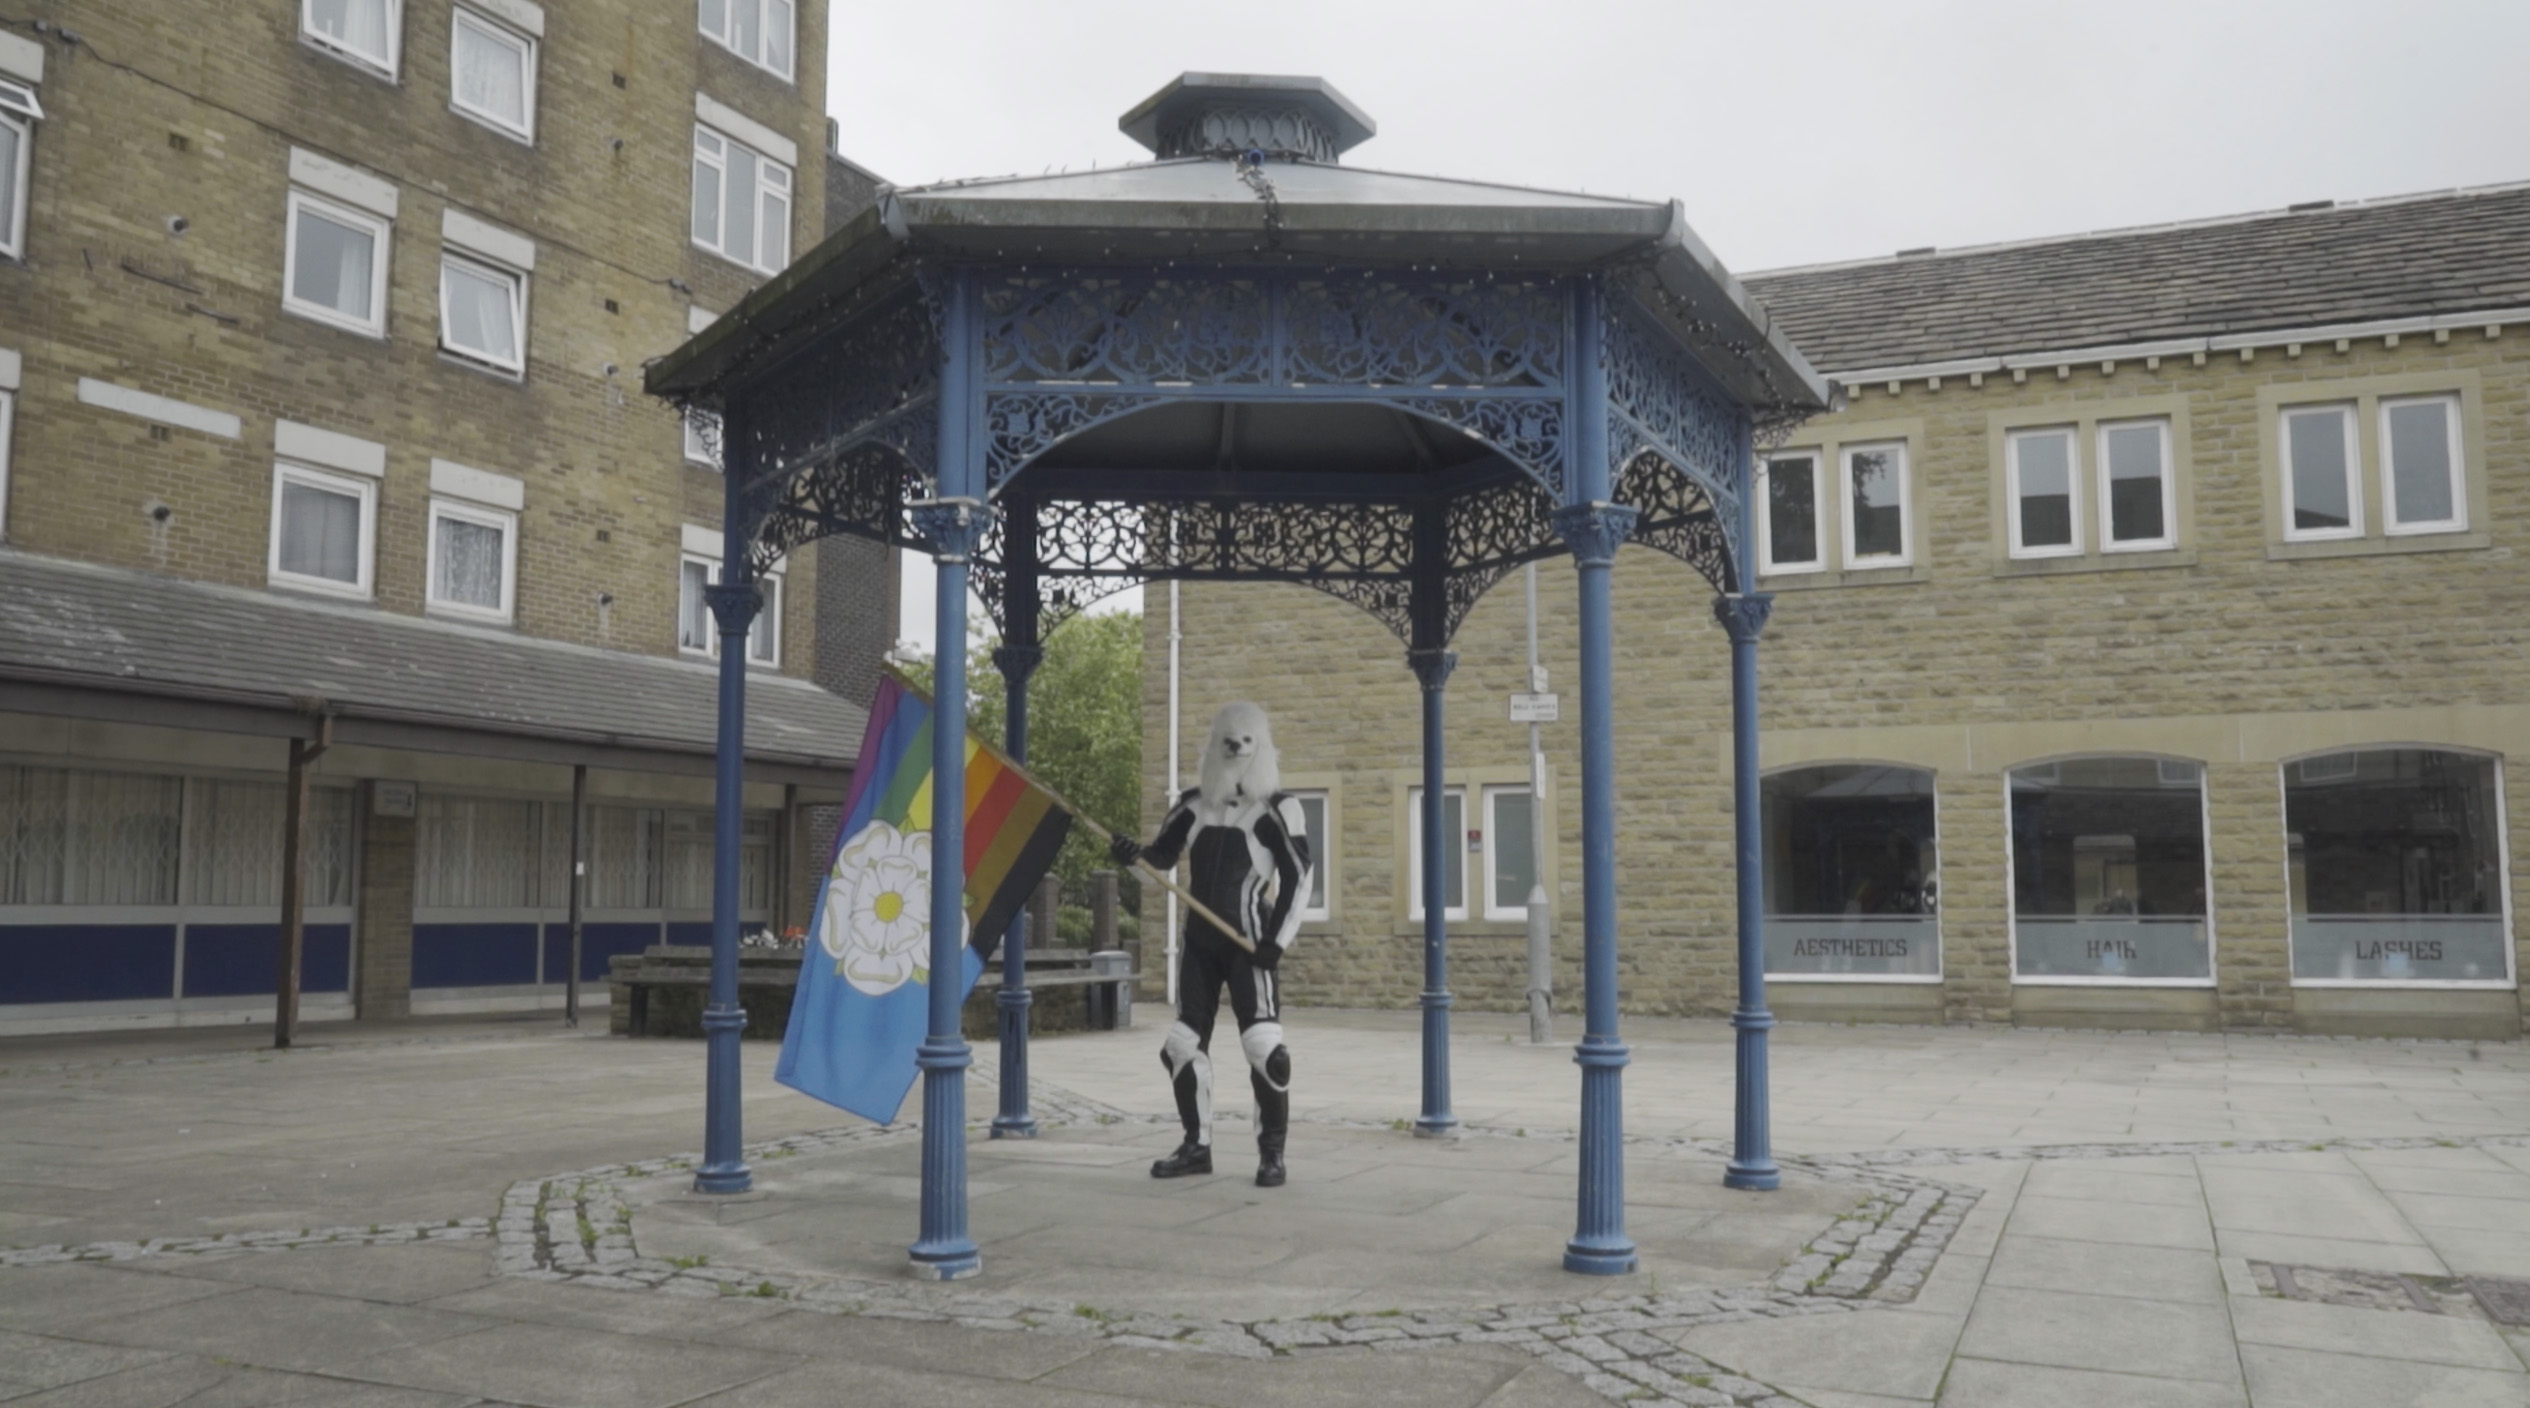 A humanoid dog waves a Yorkshire rainbow flag from inside a bandstand